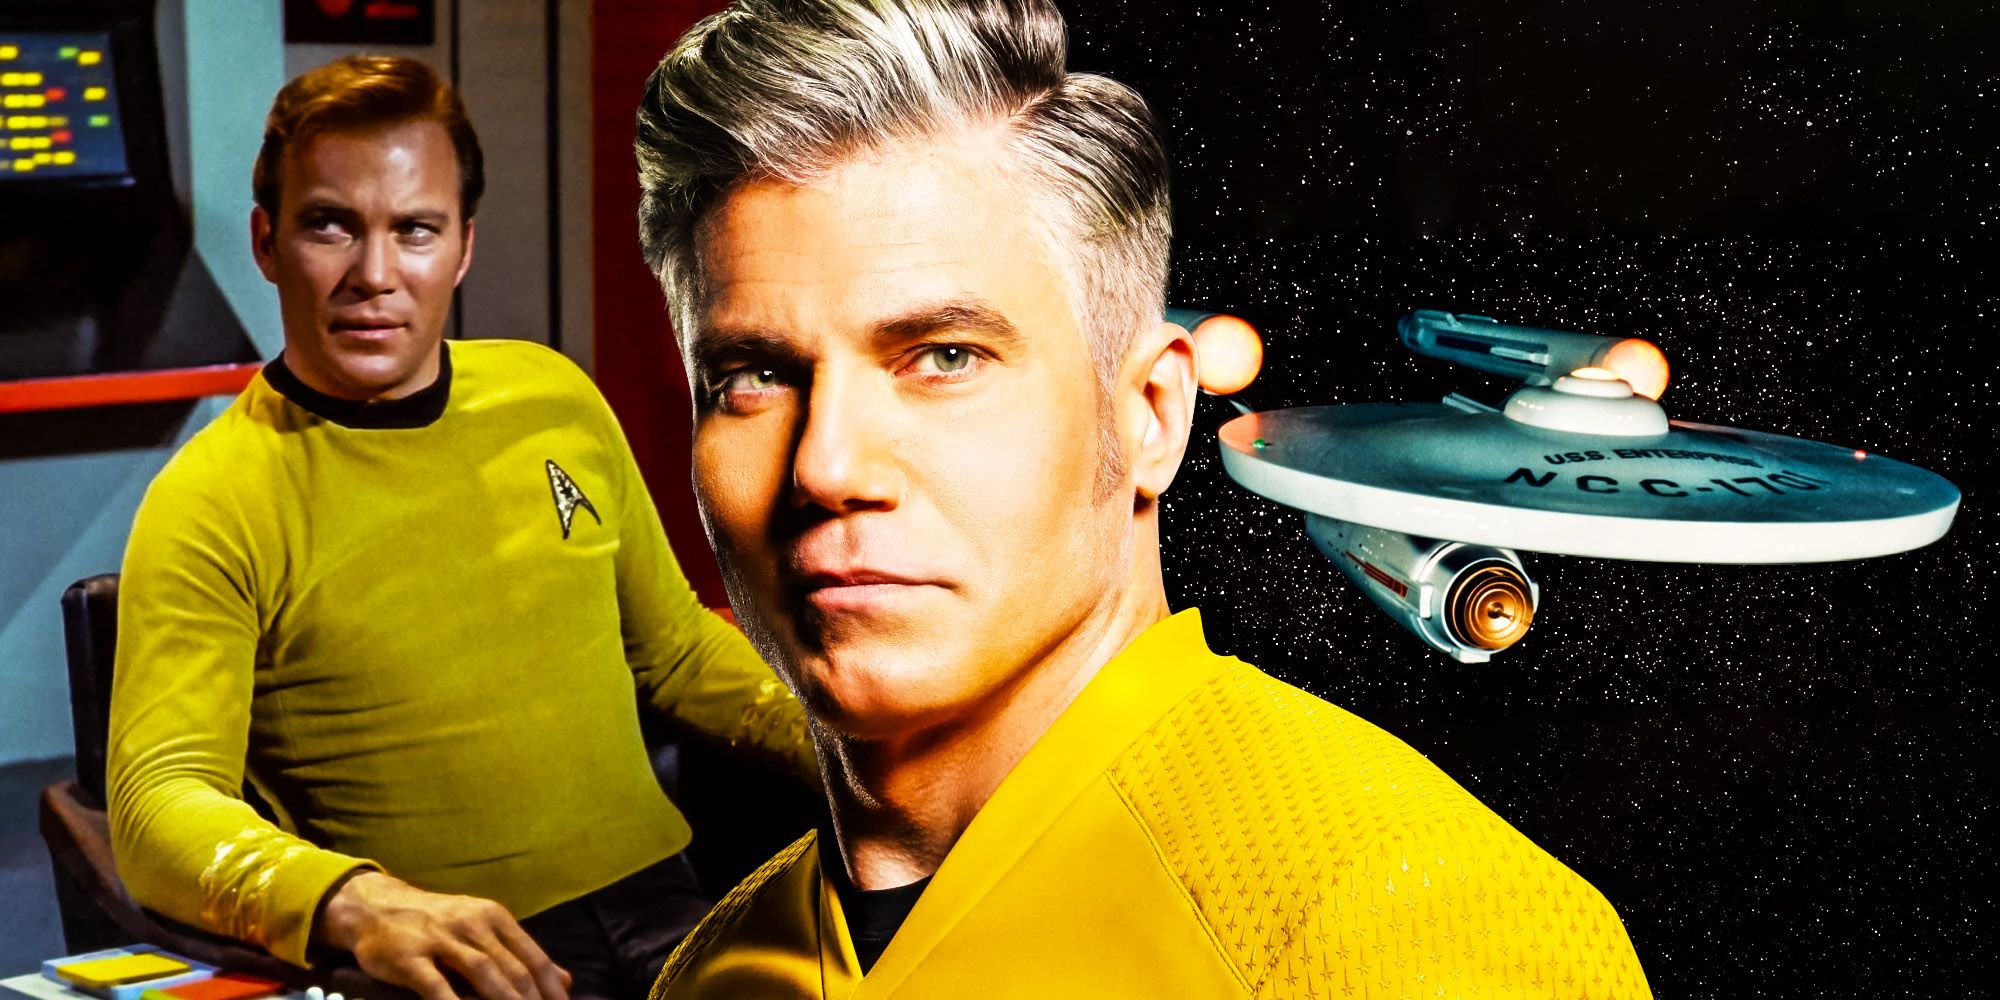 Captain Pike and Captain Kirk with the USS Enterprise.